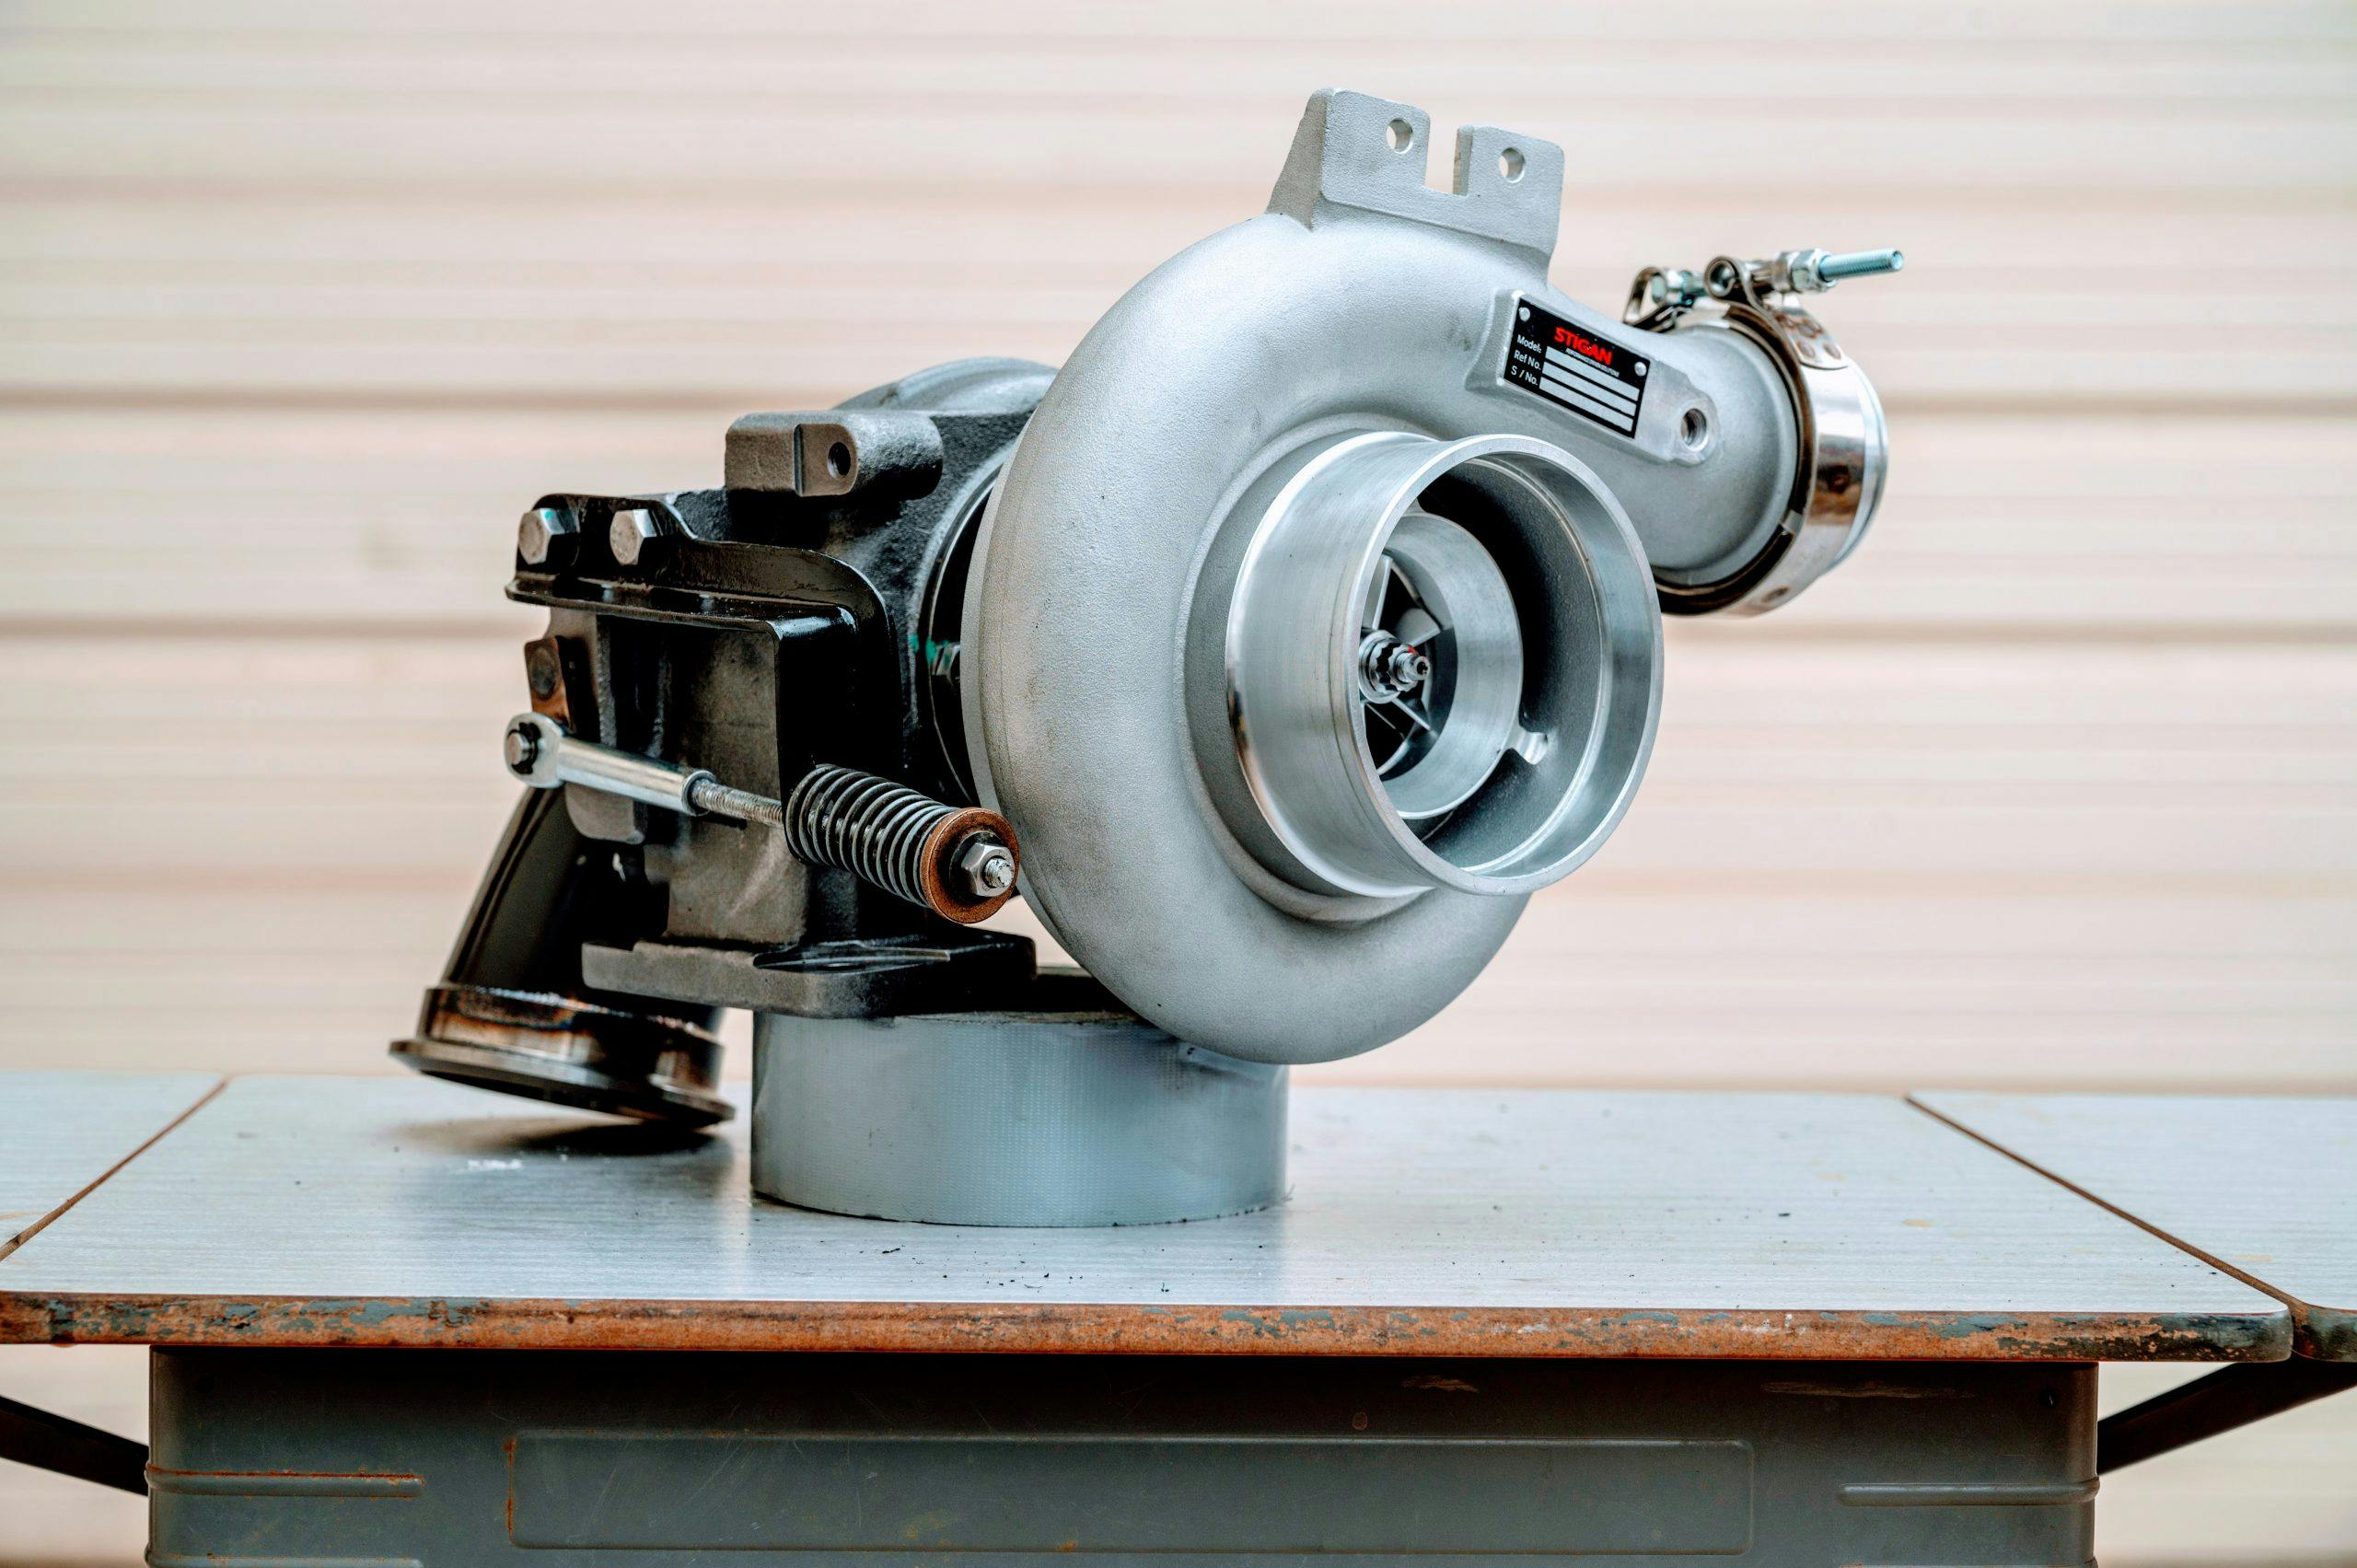 How To Build Custom Turbo Kit, Step-By-Step Guide